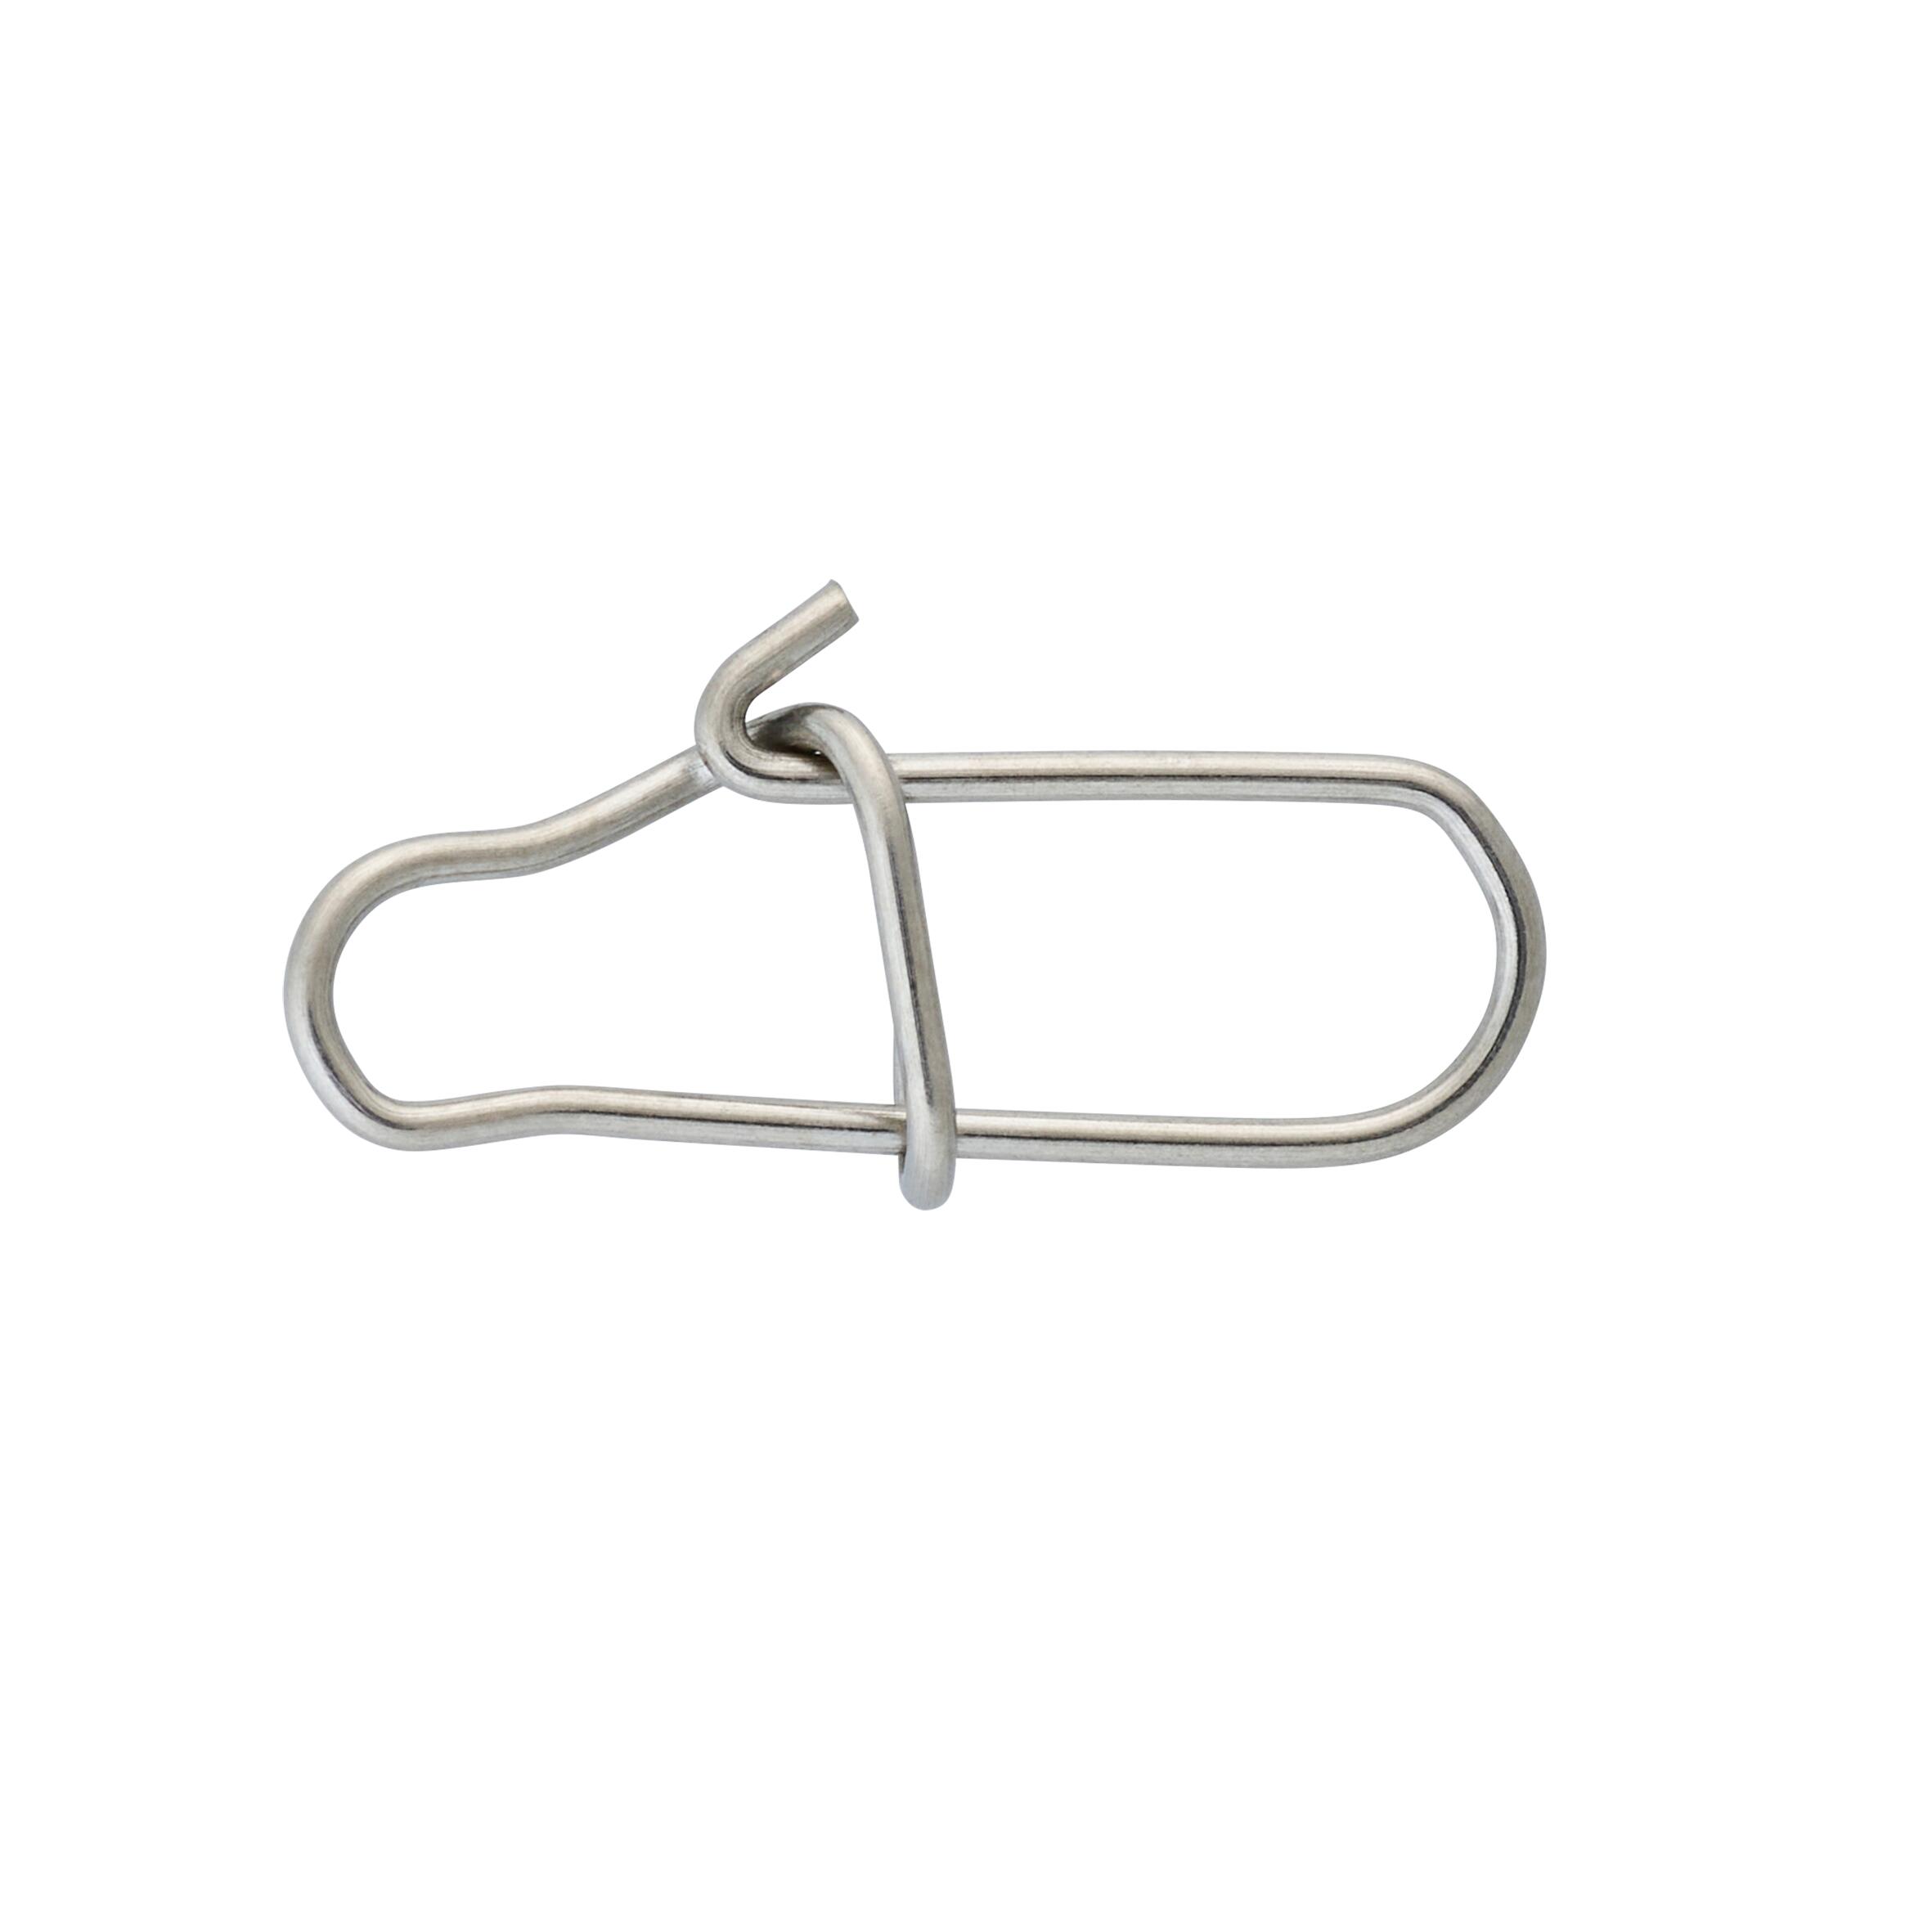 Fishing Stainless Steel Double Snap Clips x10 - Caperlan - Decathlon